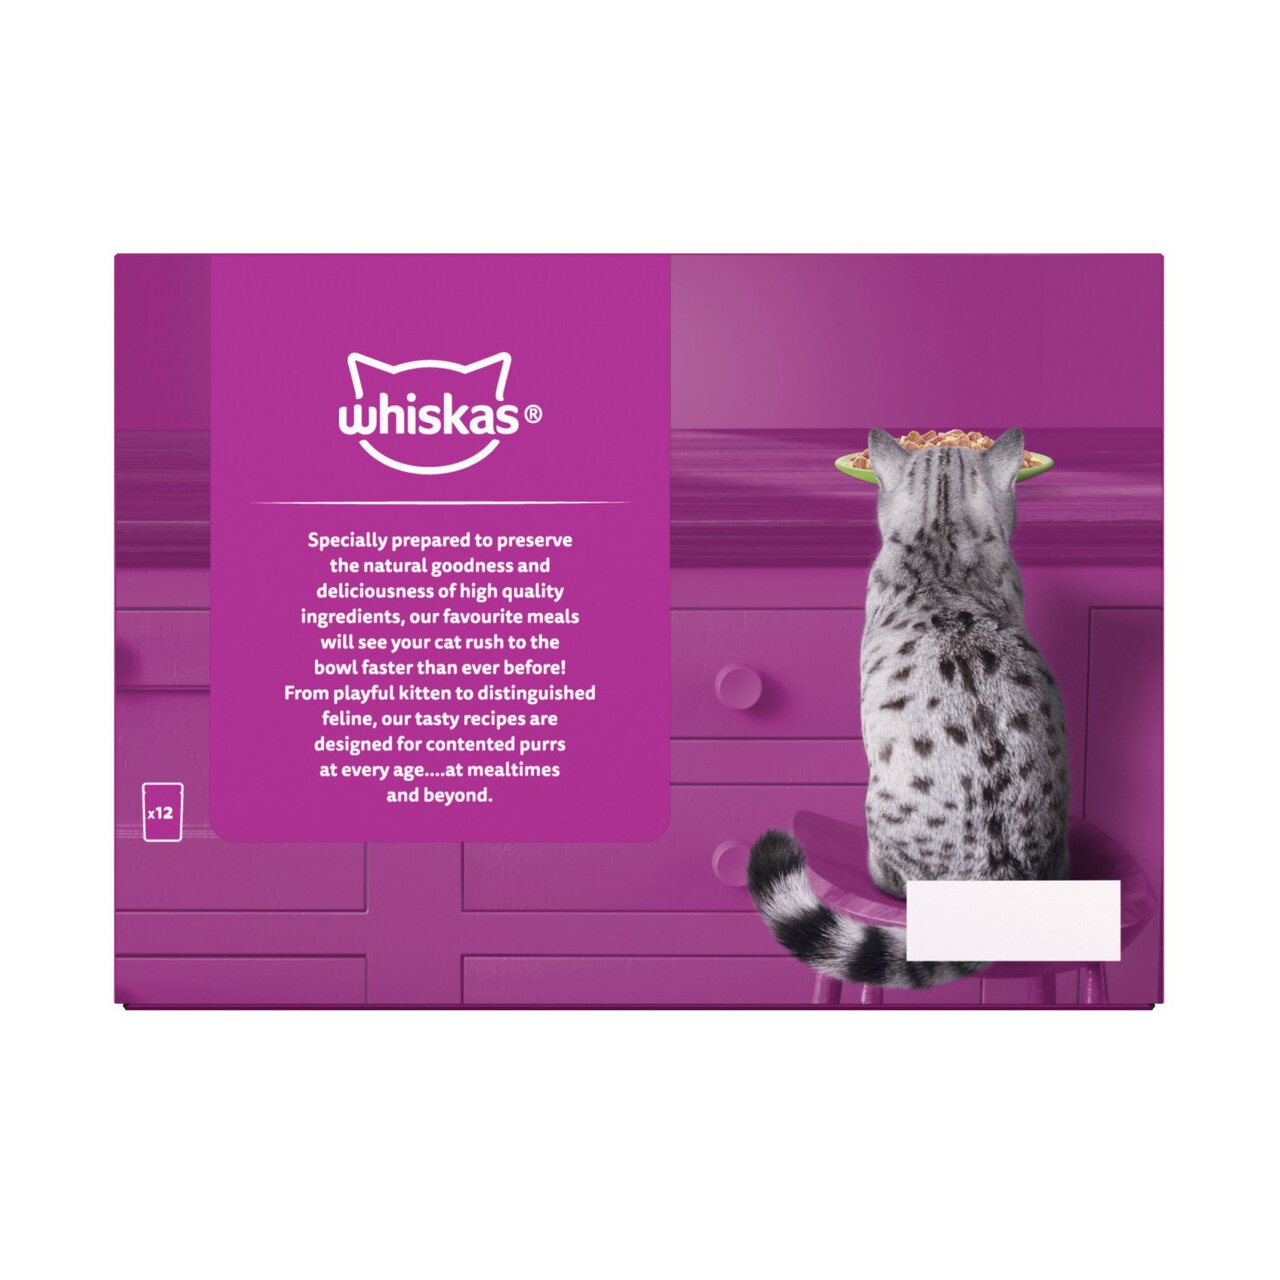 Whiskas 1+ Adult Wet Cat Pouches Mixed Menu in Jelly 12 x 85g